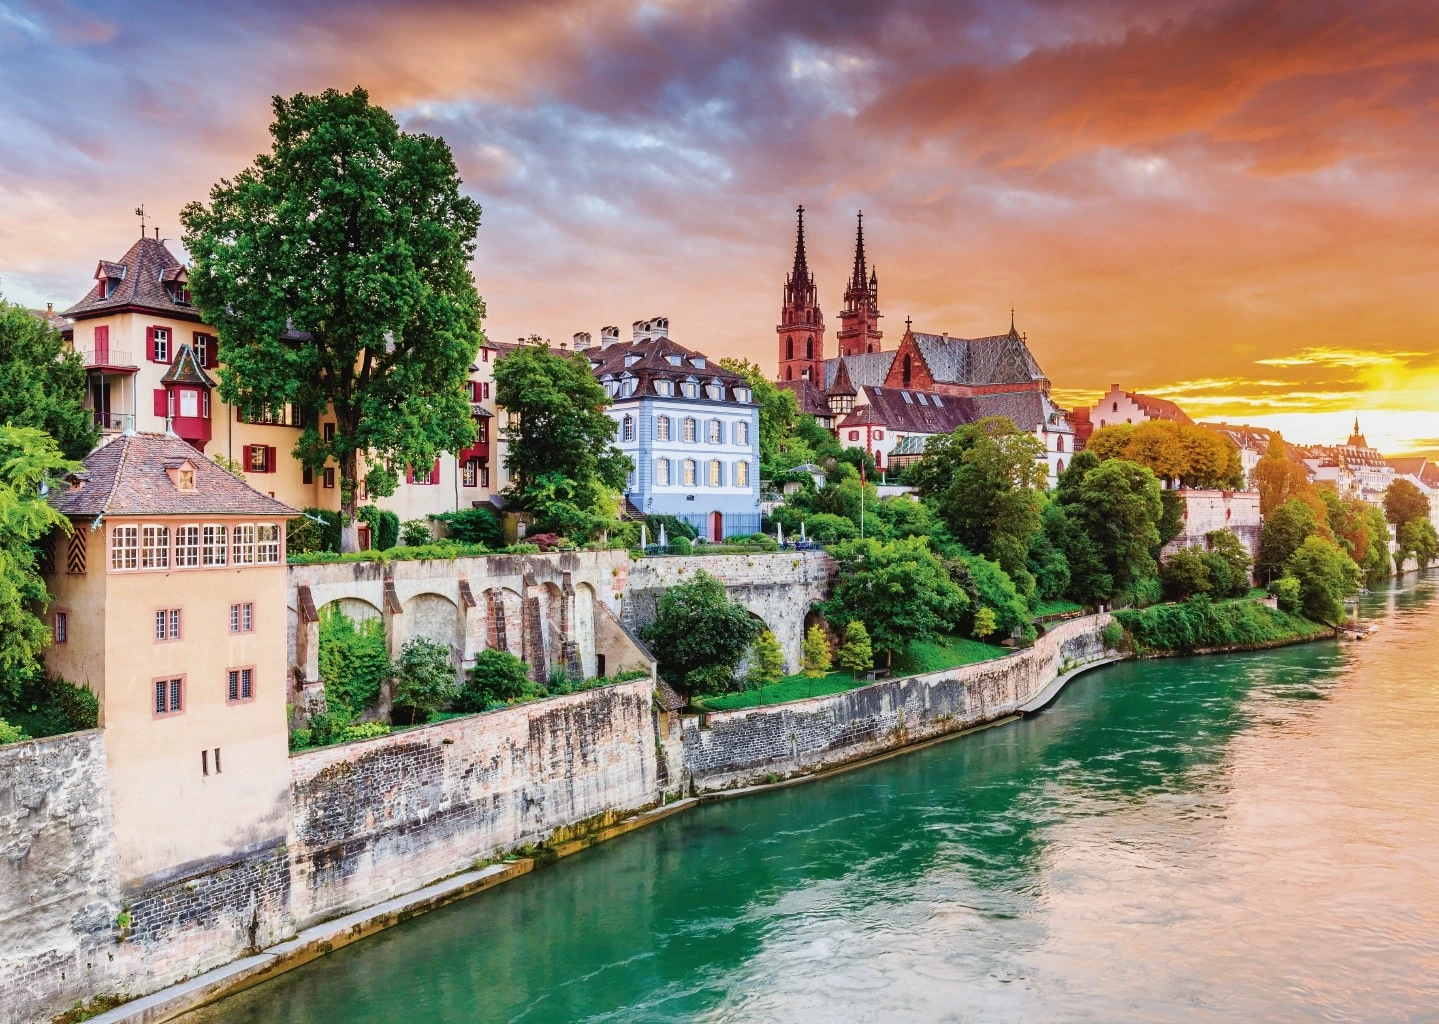 Find the best accommodations & places to stay in Bern - CuddlyNest.